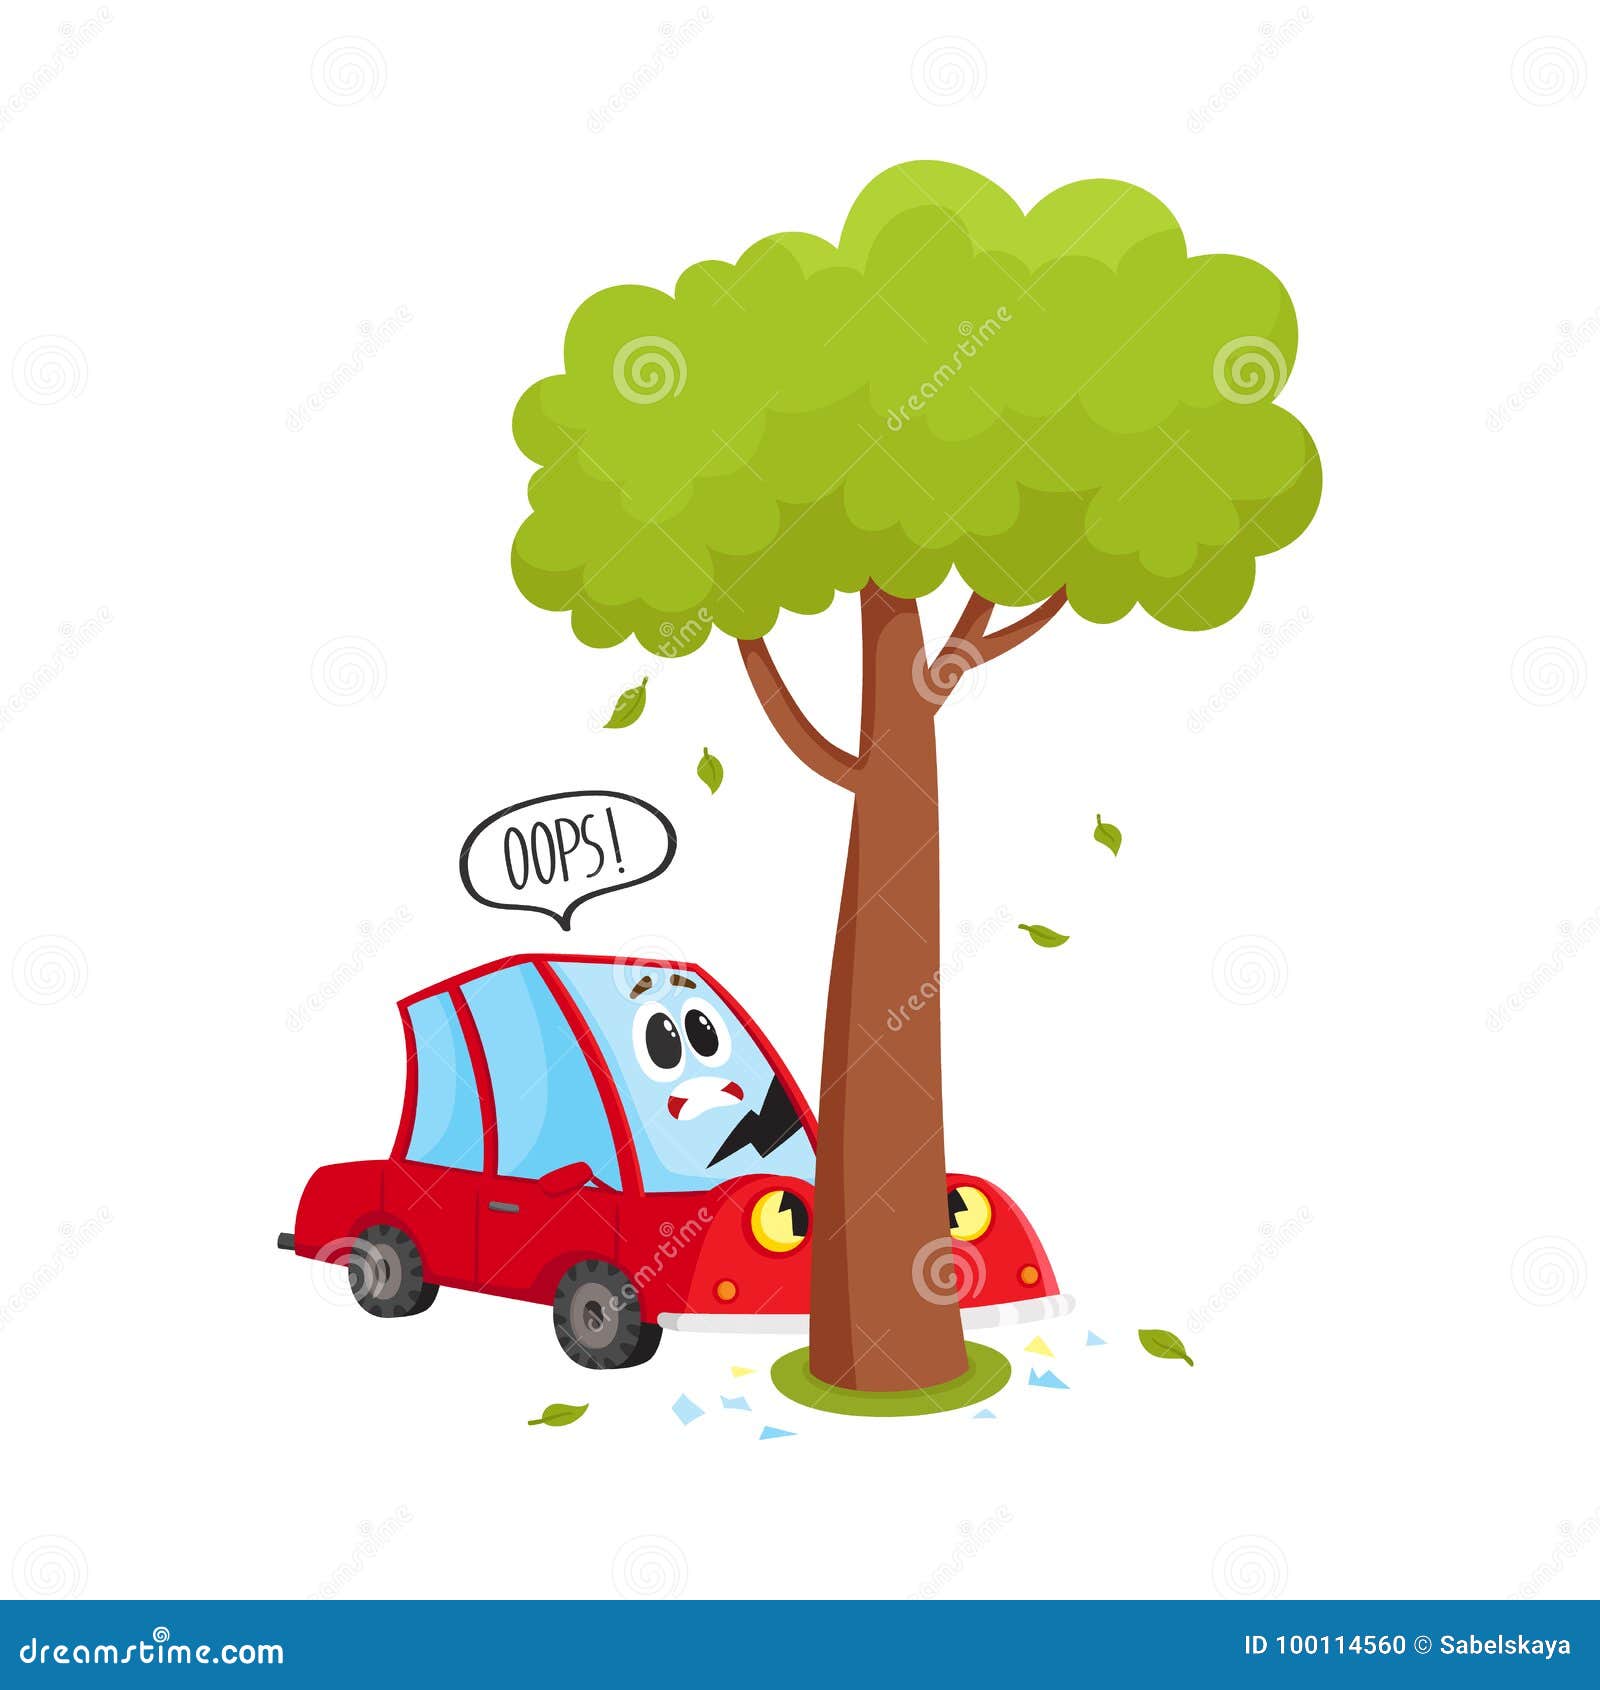 Cartoon vector illustration of car accident, crashing into the